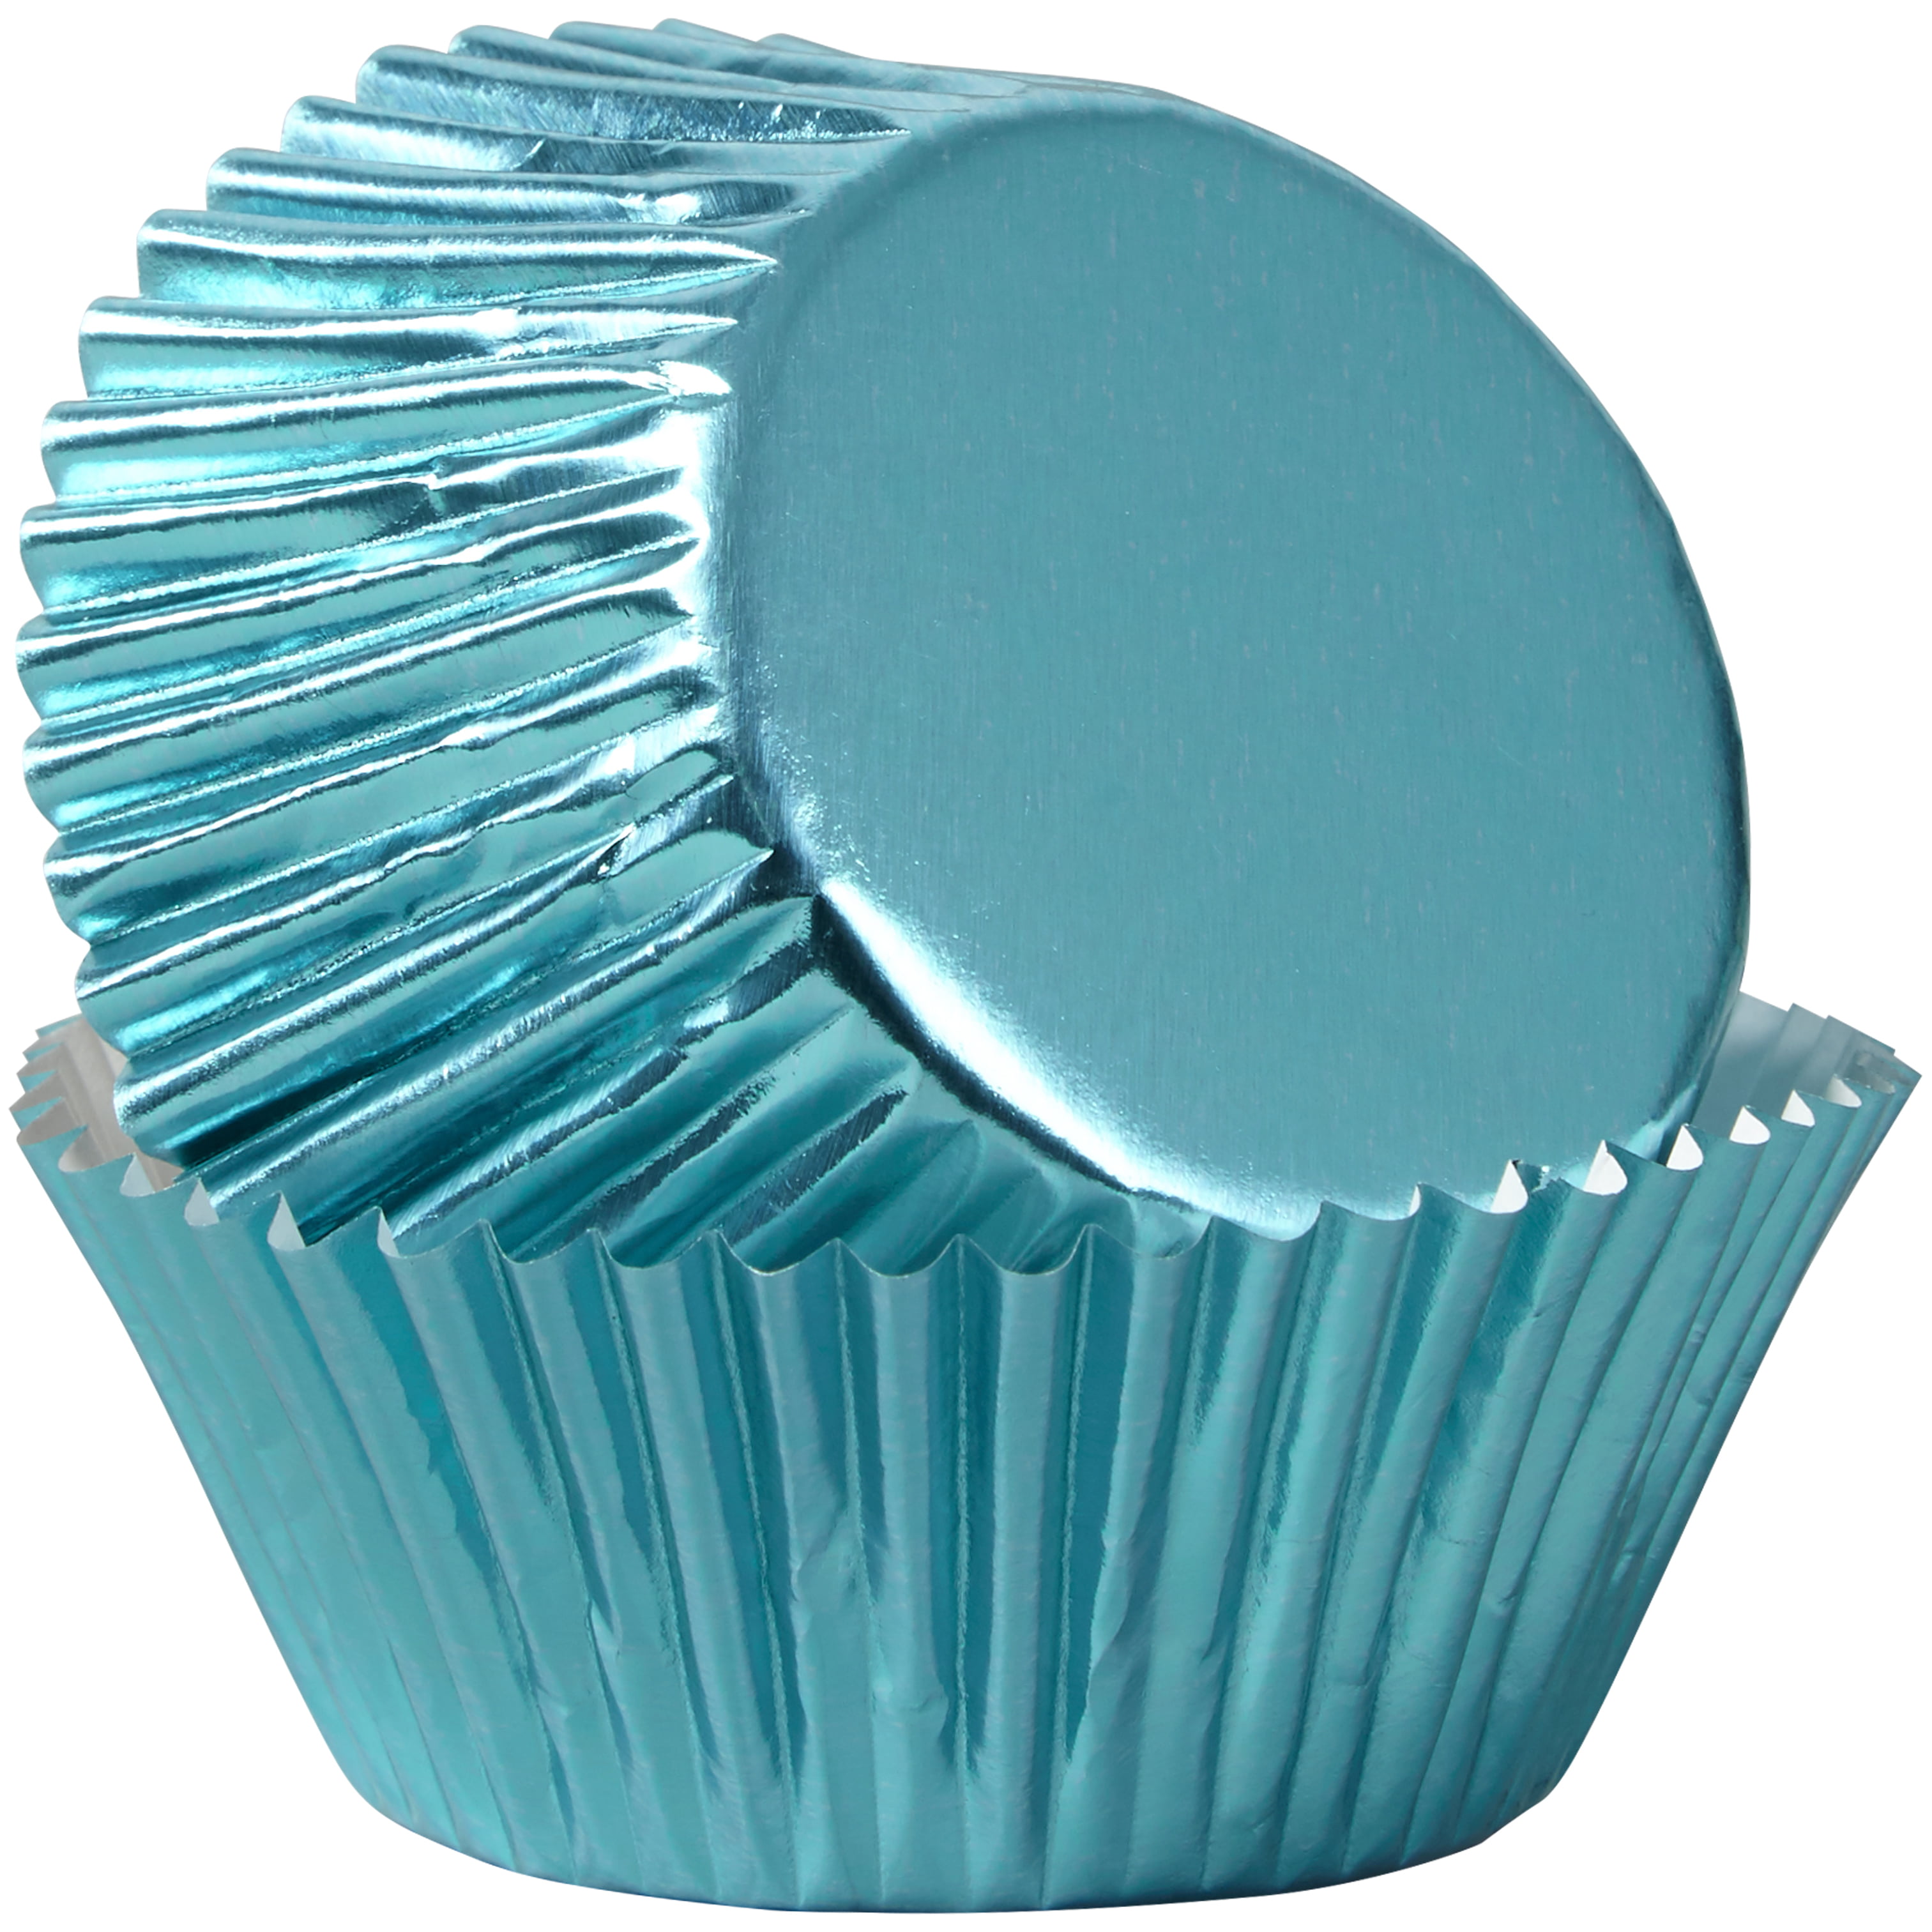 Details about   Wilton Teal Turquoise Cupcake Baking Cup Wrappers Liners! 